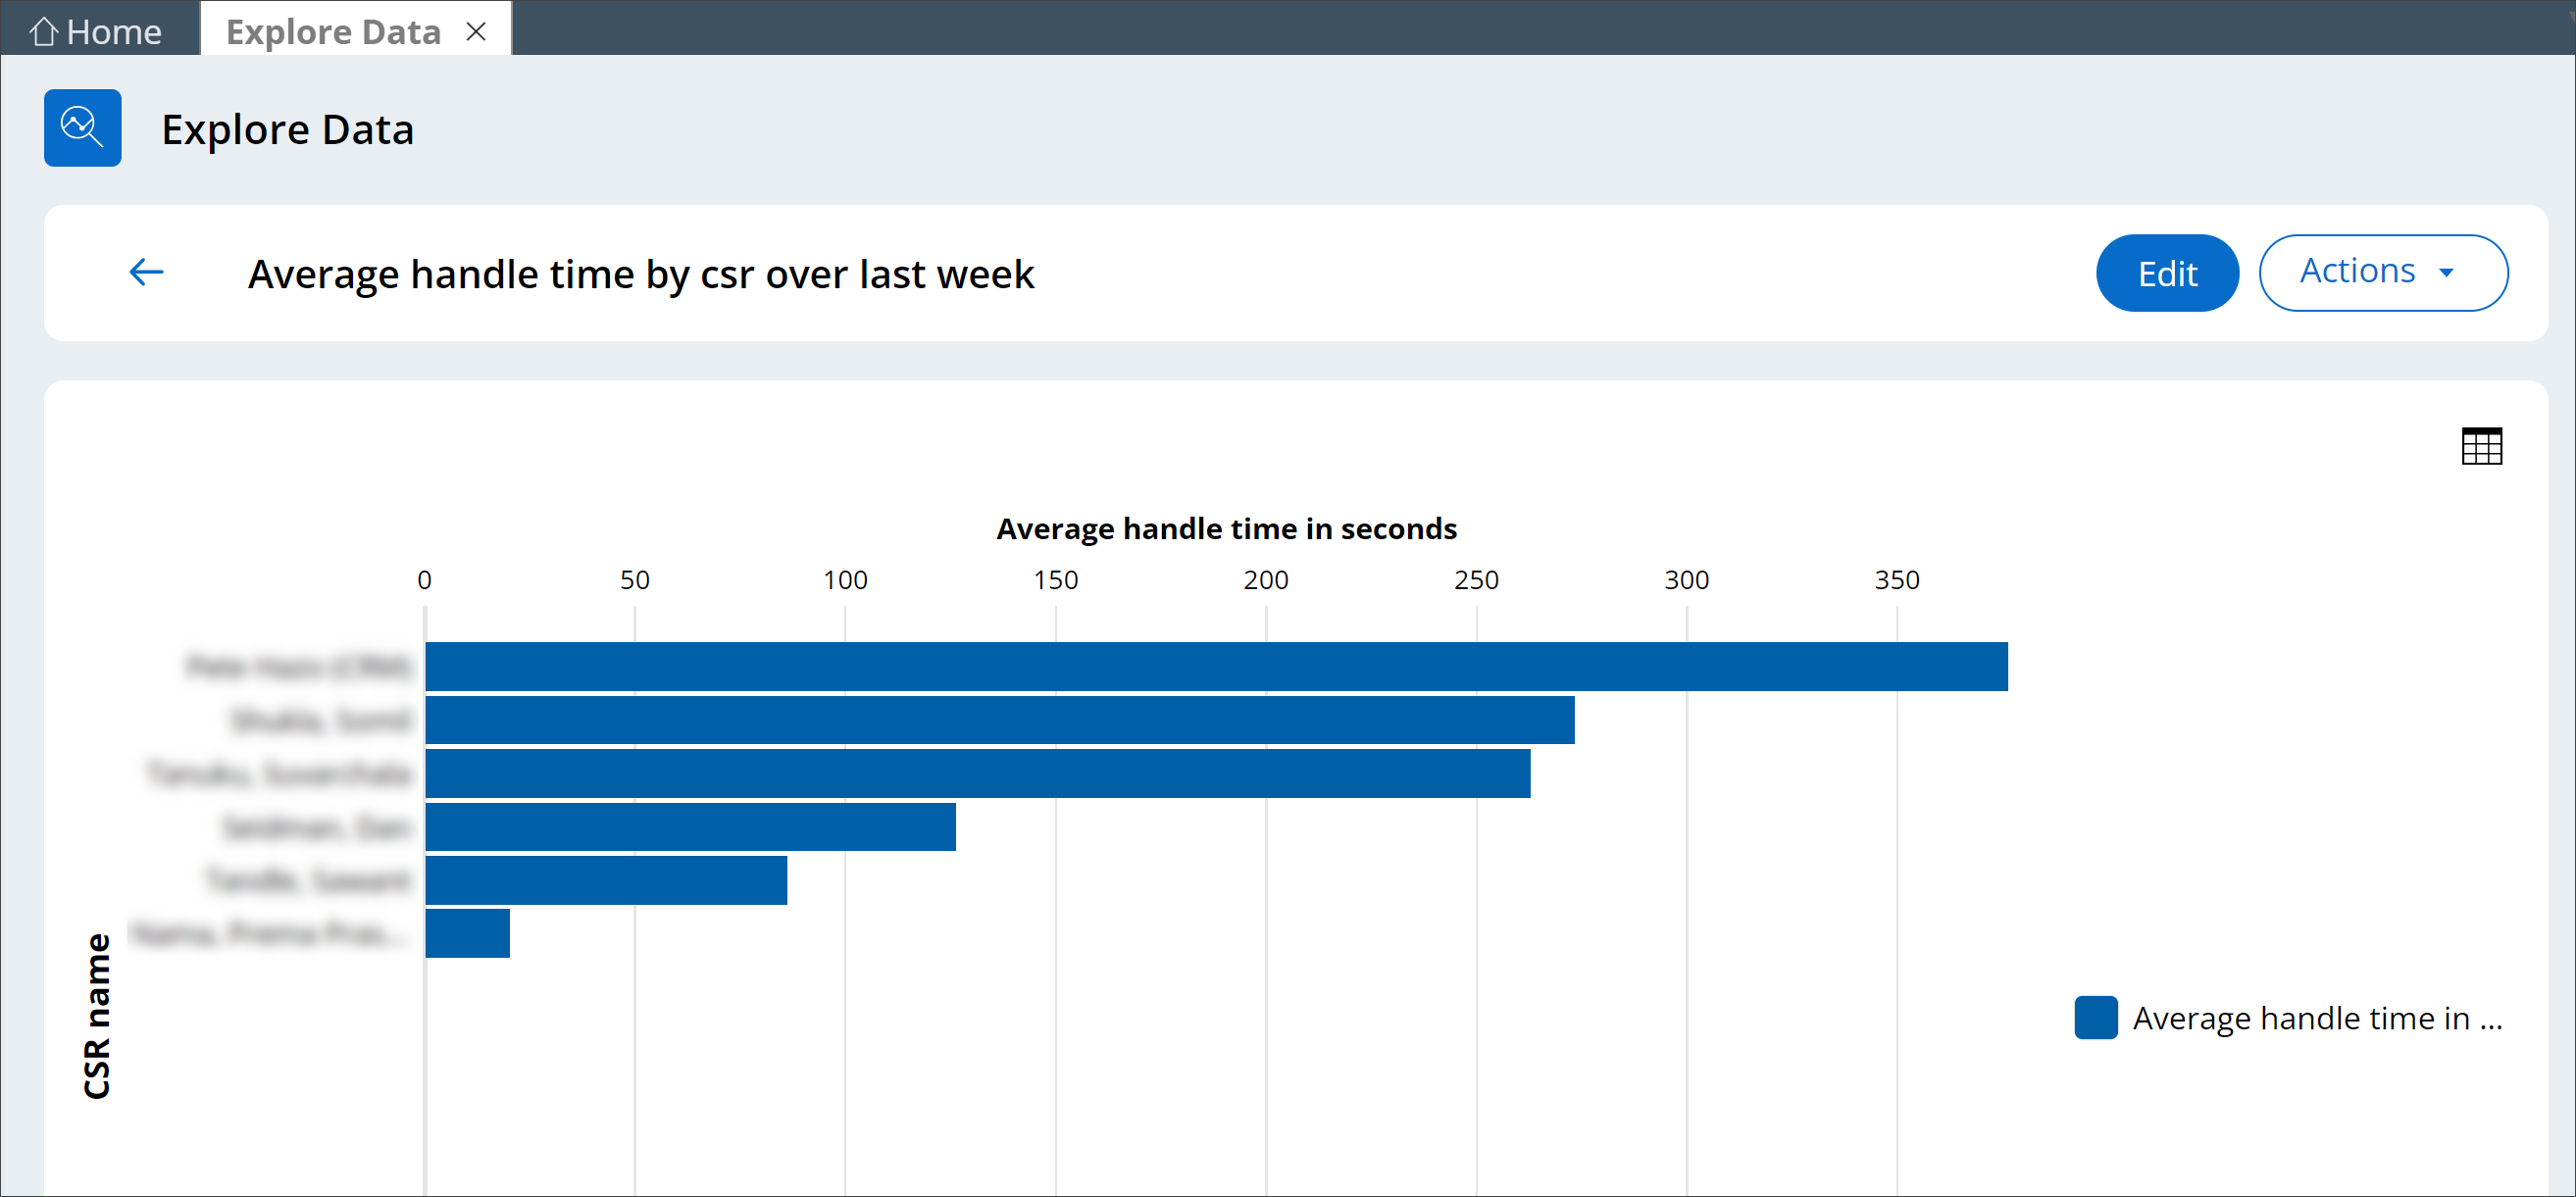 Sample insight shows the average handle time by CSR for previous week.